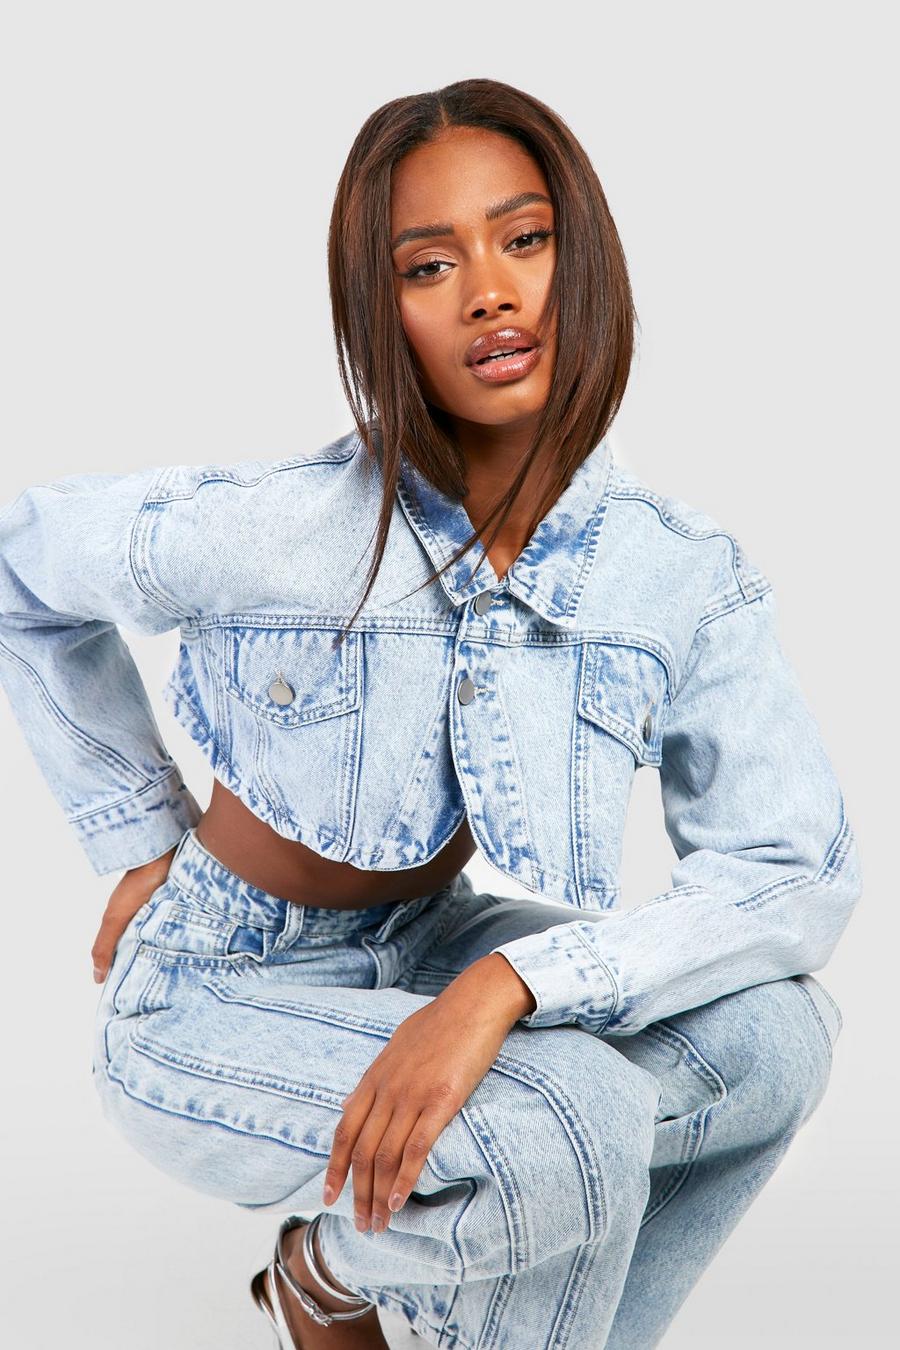 Missguided Petite crop top and wide leg pajama set in baby blue